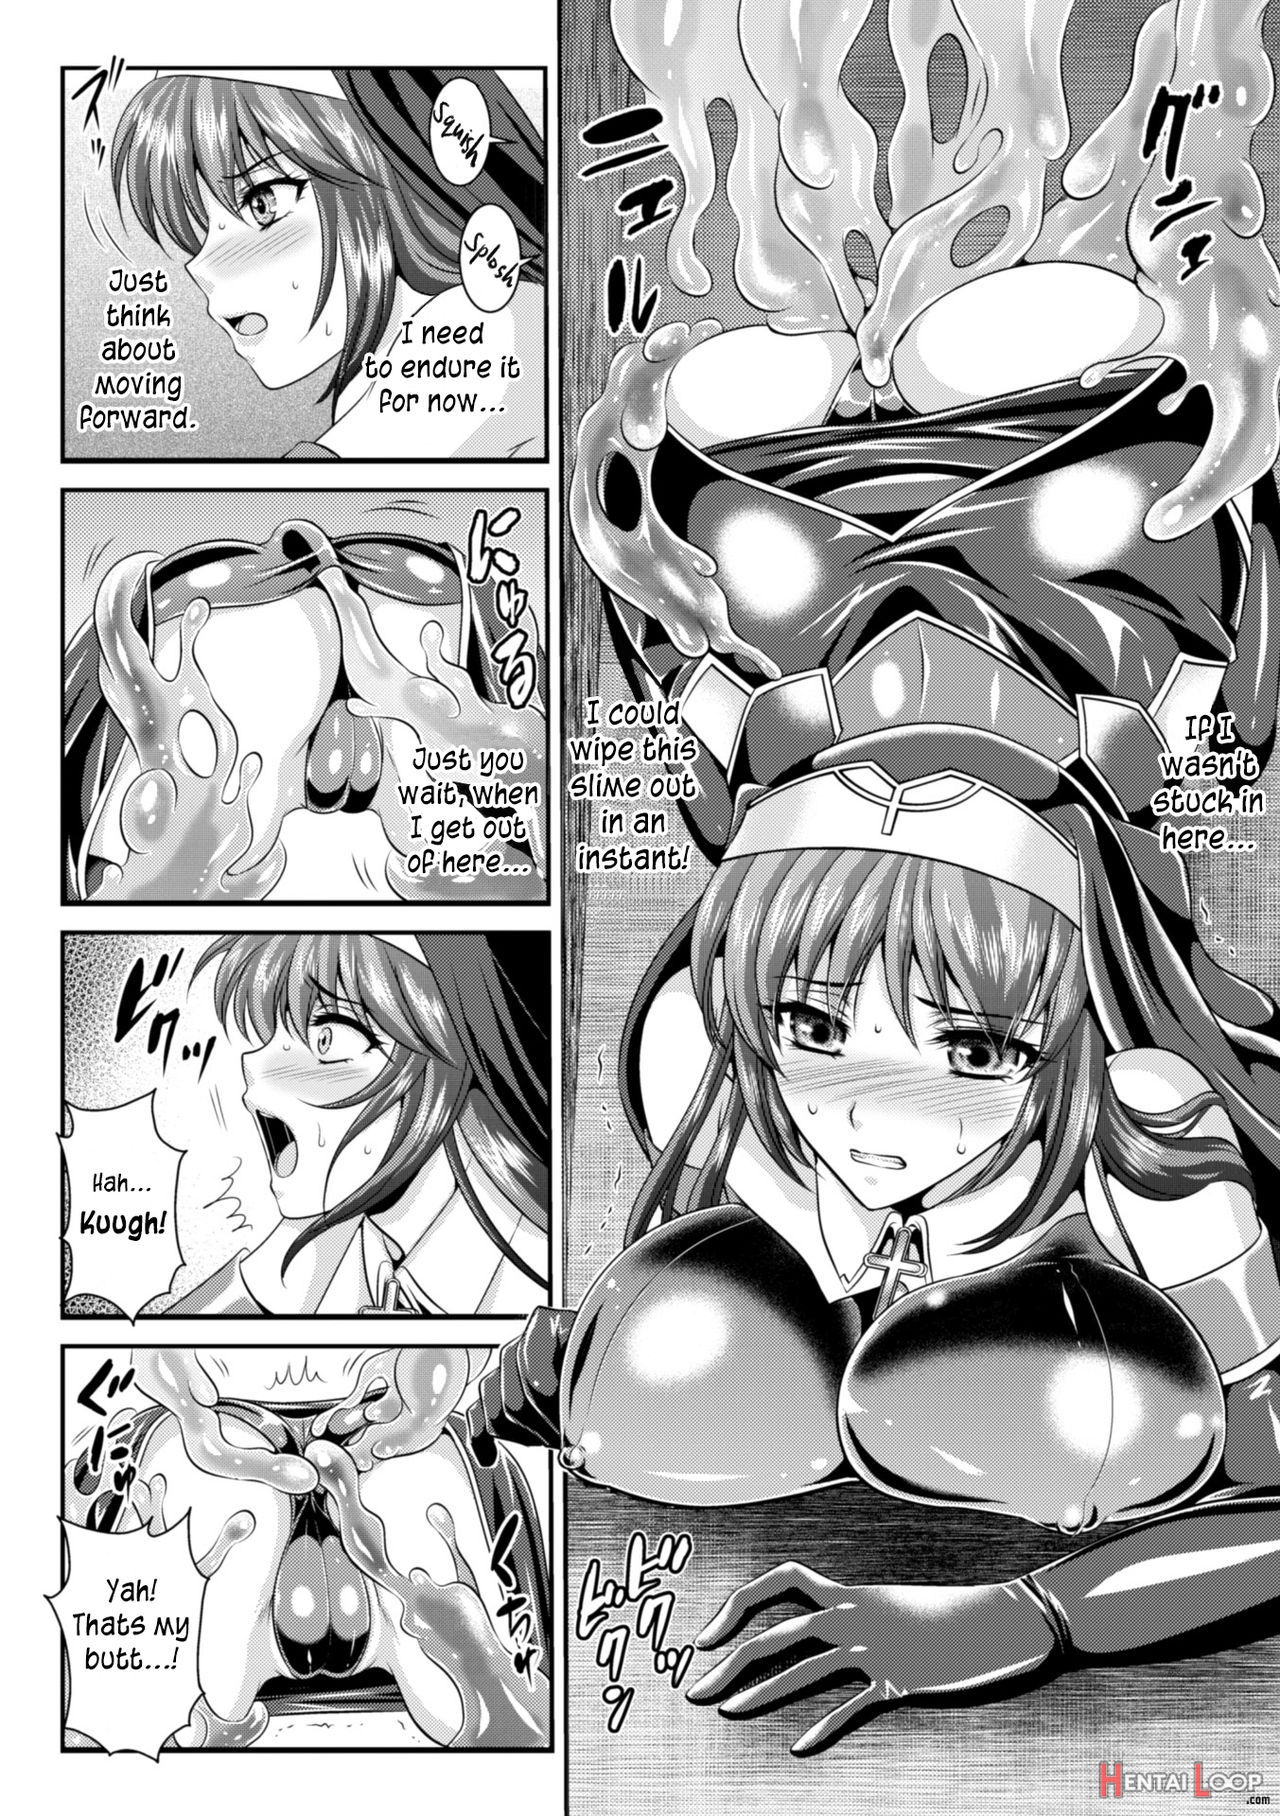 Lieseâ€™s Destiny: Punishment Of Lust On The Slime Prison Ch. 1-4 page 71